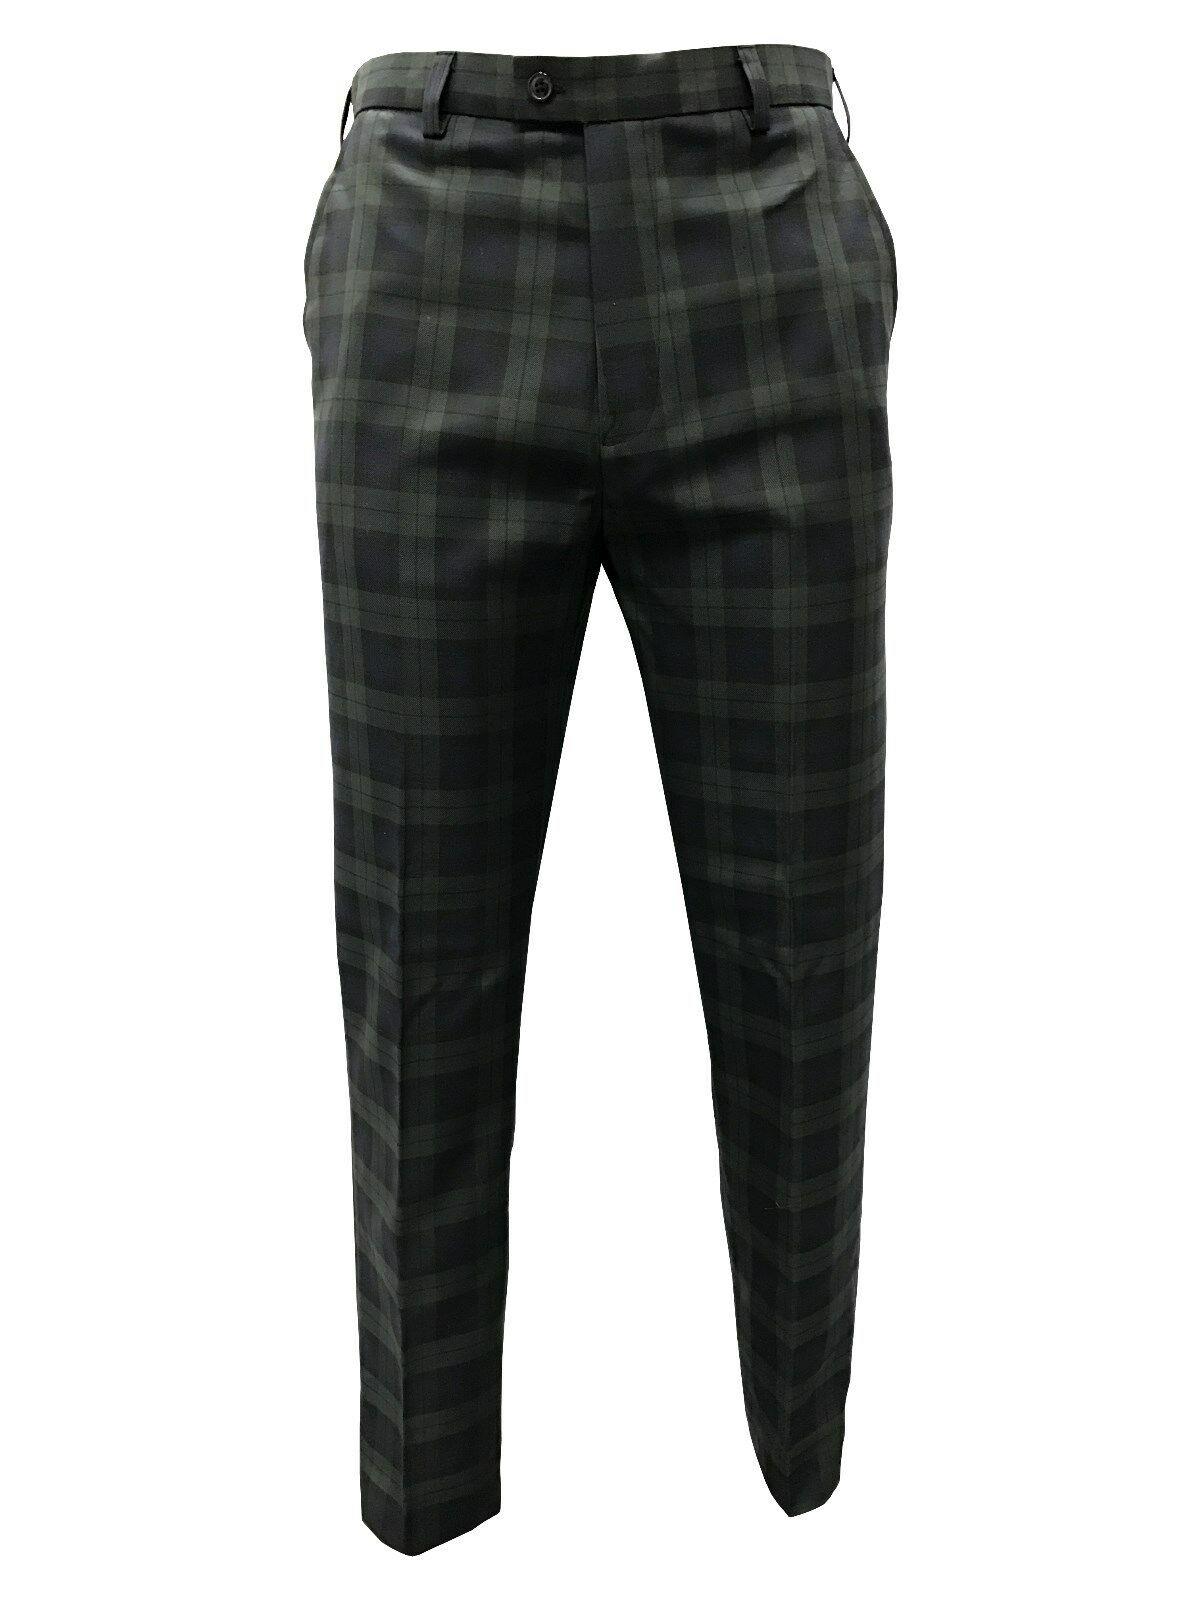 Mens Scottish Black Watch Tartan Trousers Available in Various Sizes | eBay